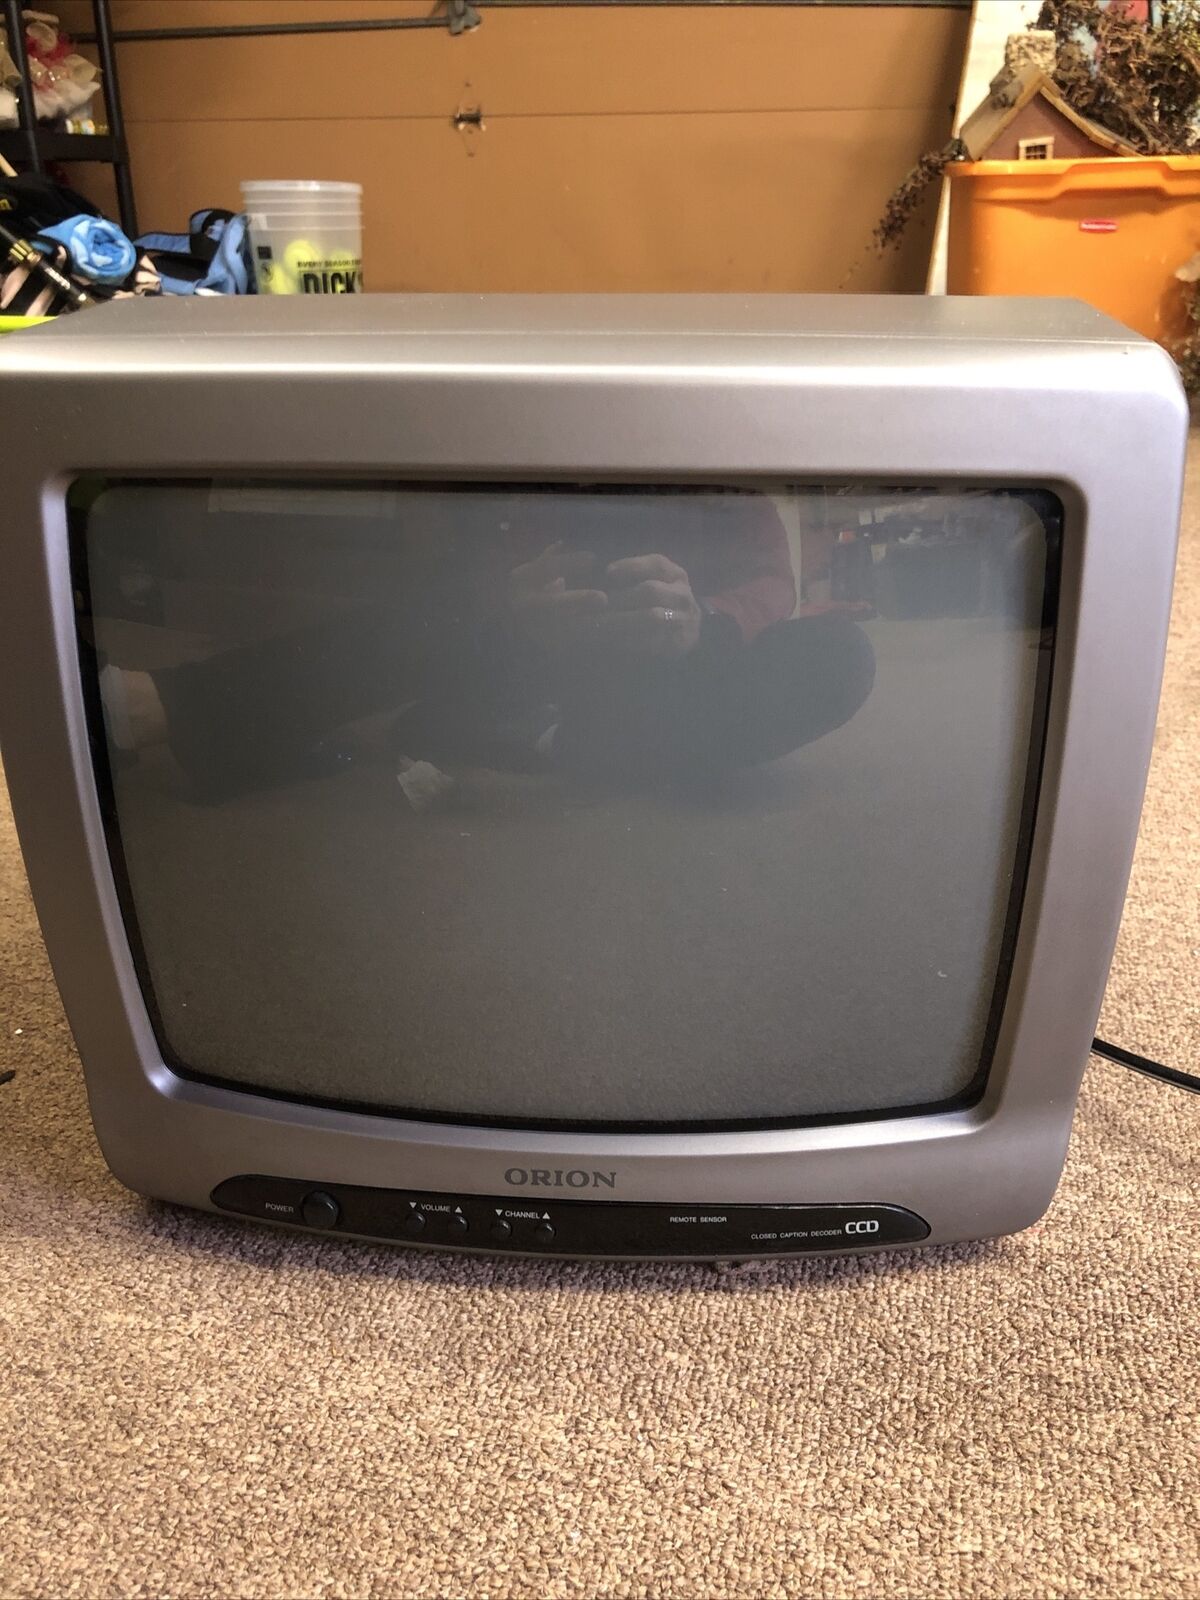 Orion 13 Inch  Retro Gaming TV Television Tv1318 Works Great. Available Now for $24.00